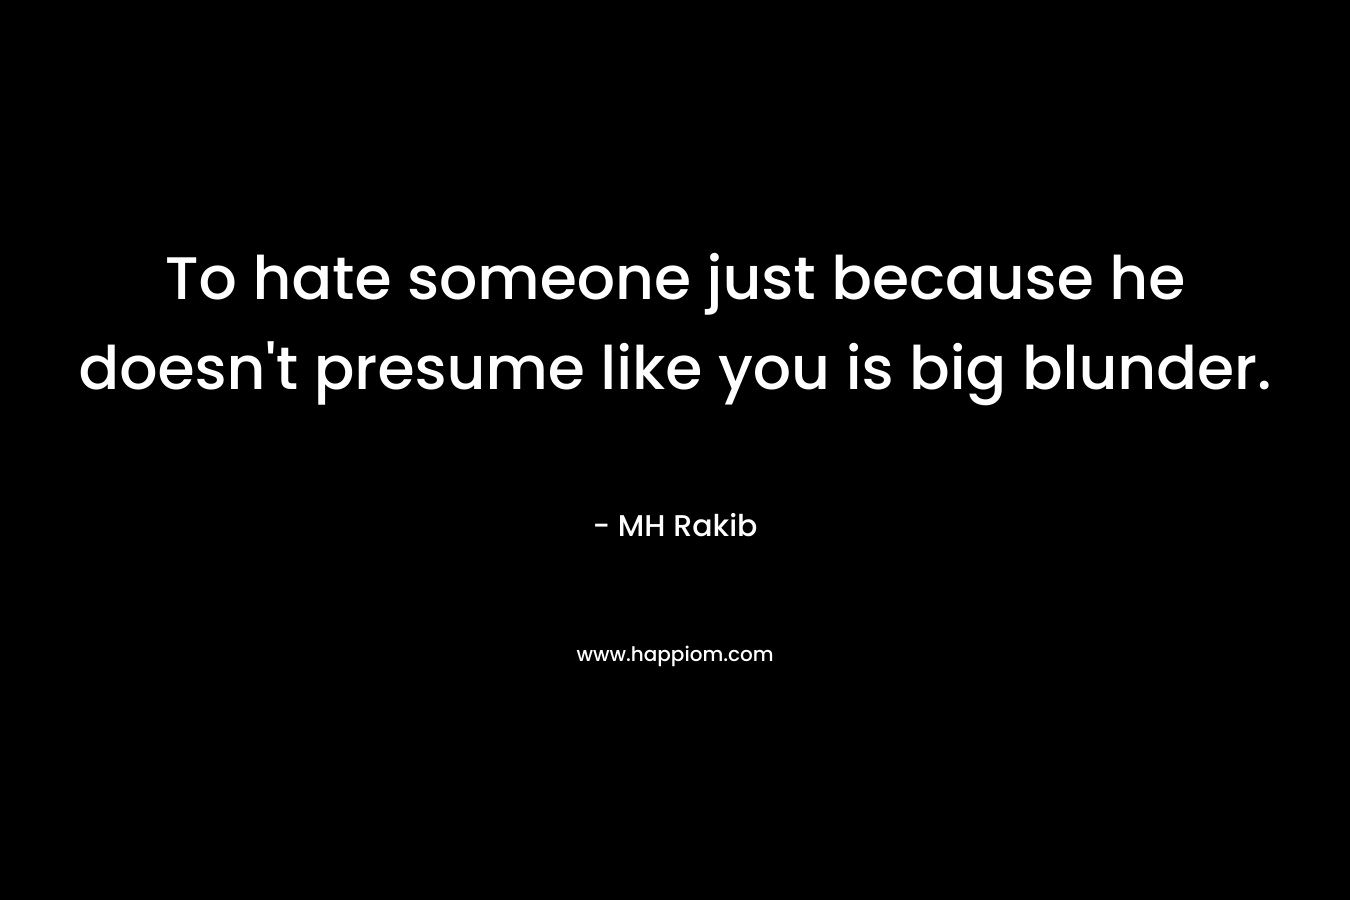 To hate someone just because he doesn't presume like you is big blunder.